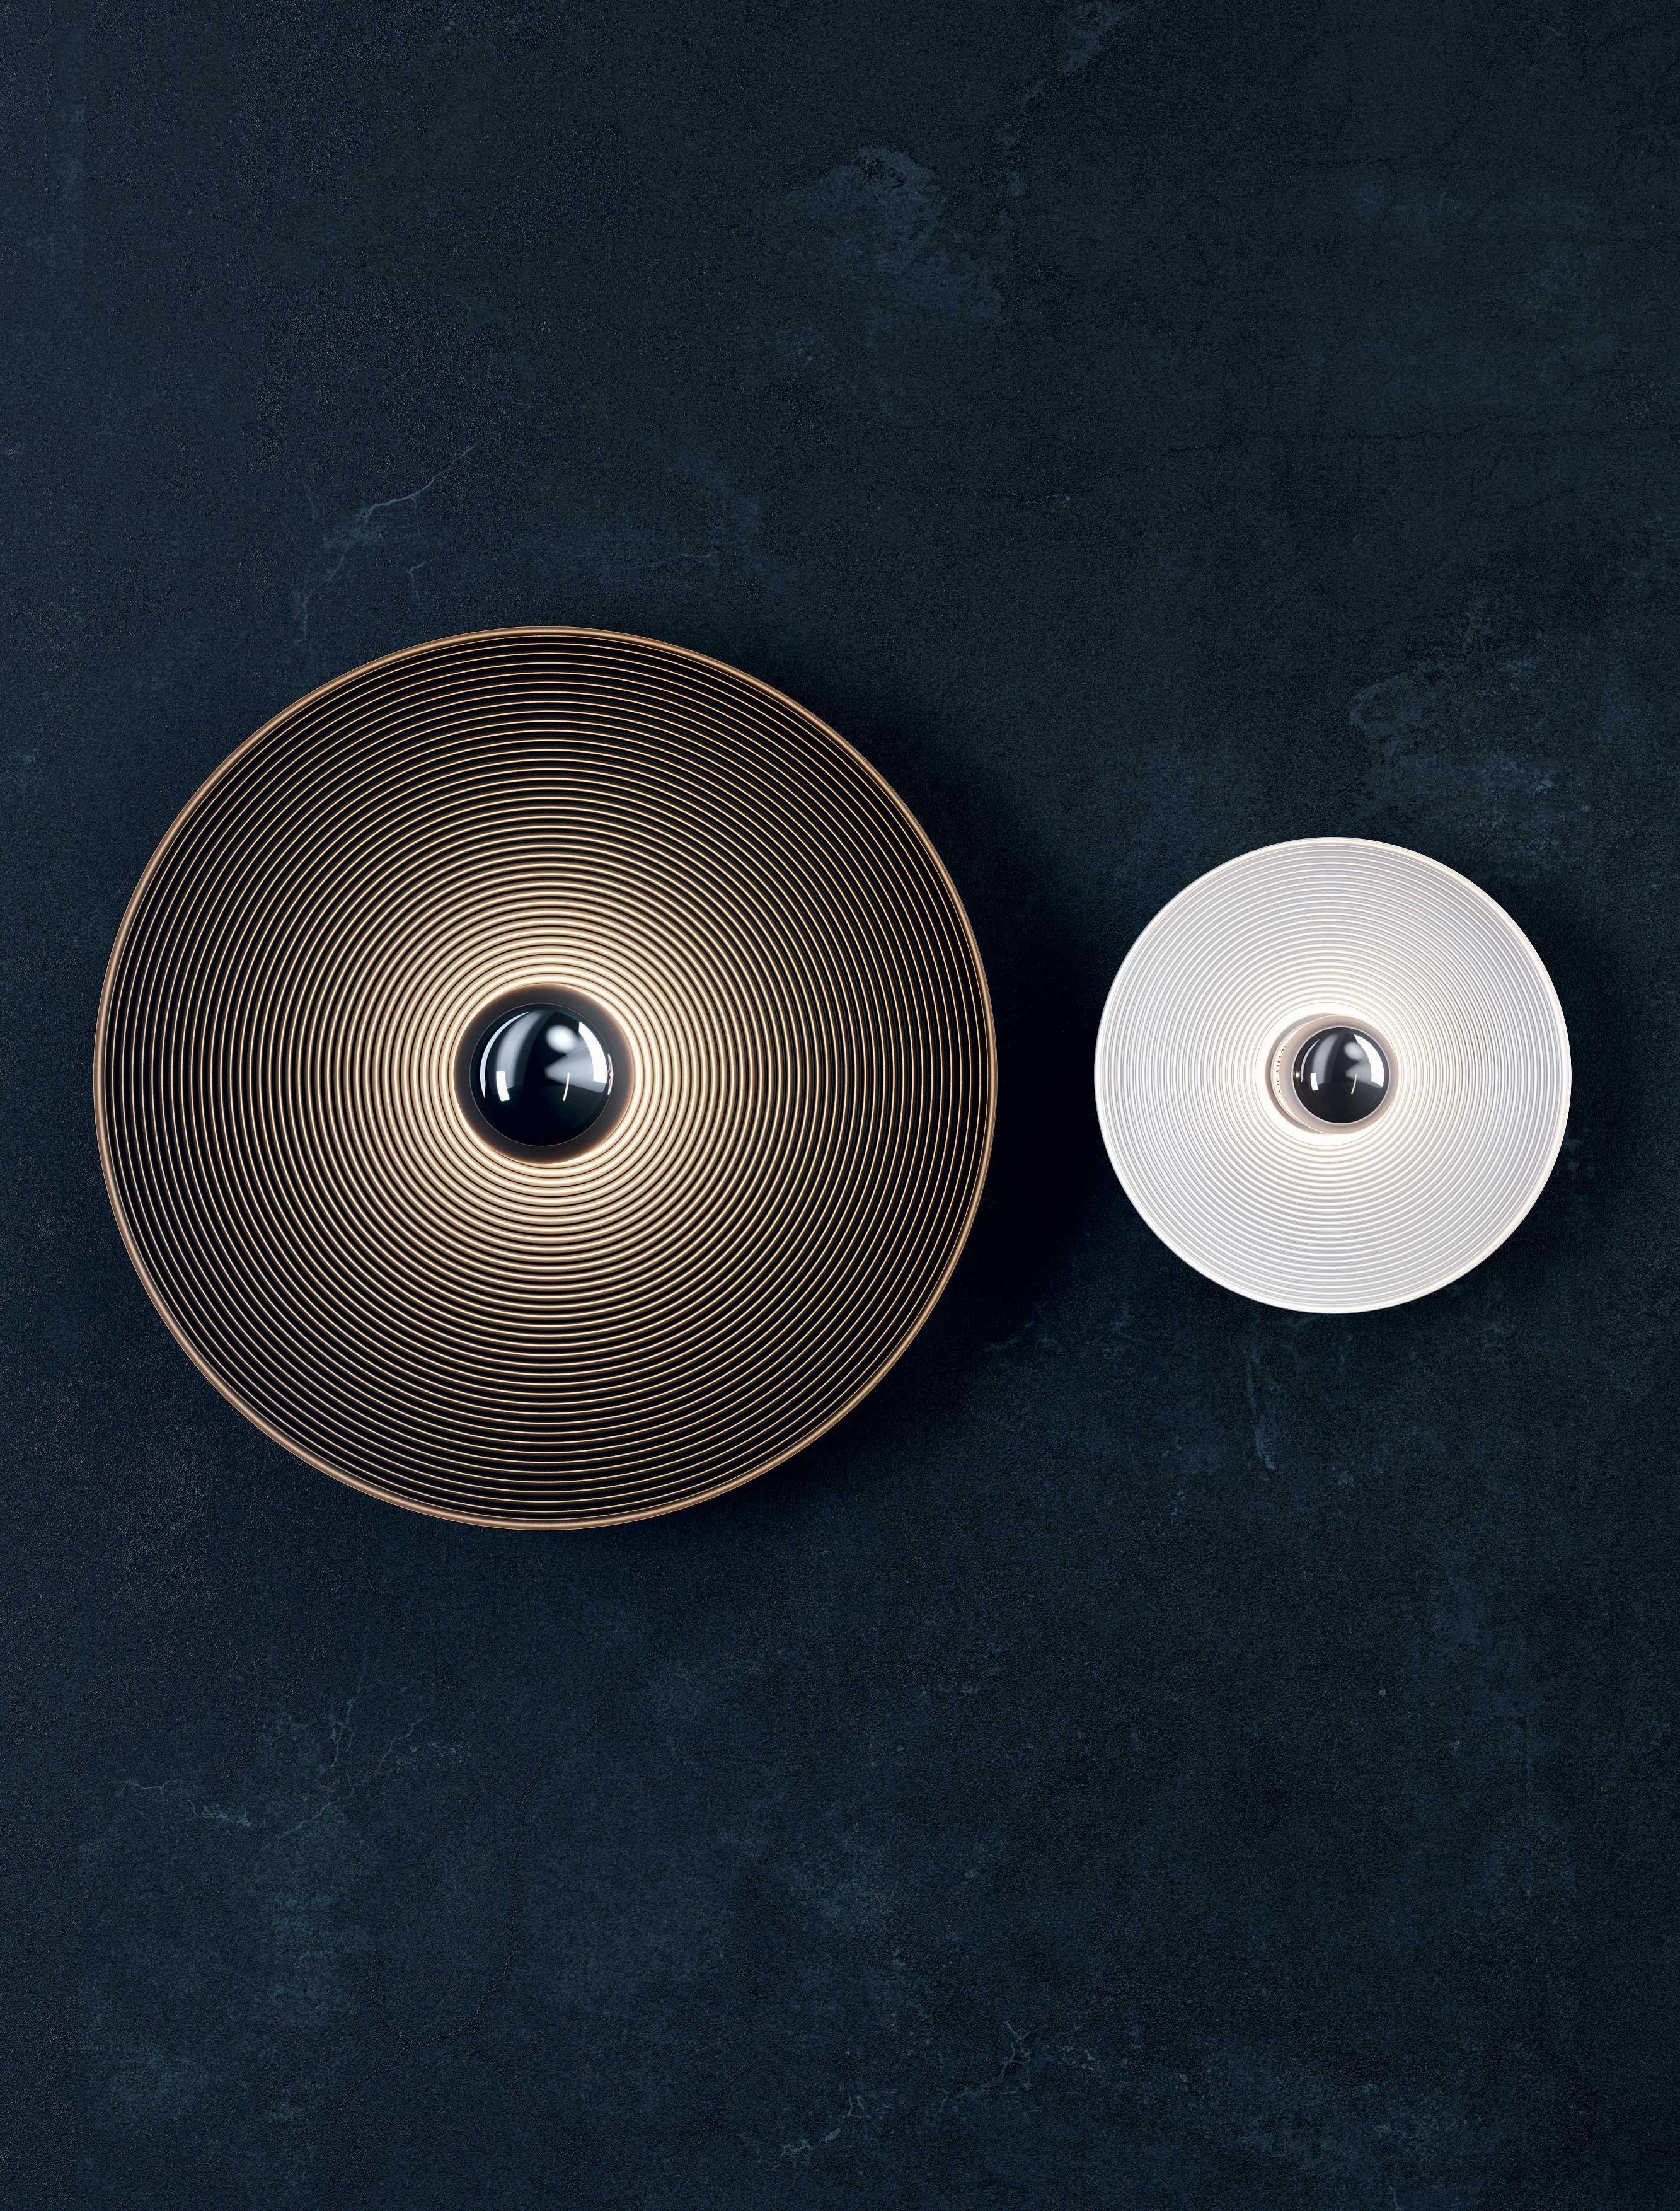 An extremely graphic lamp, Vinyl is made up of a metal plate with a circular engraved texture reminiscent of a music record, emulating sound vibrations whilst dividing the light in a captivating manner to the human eye.

Vinyl is a versatile, spun